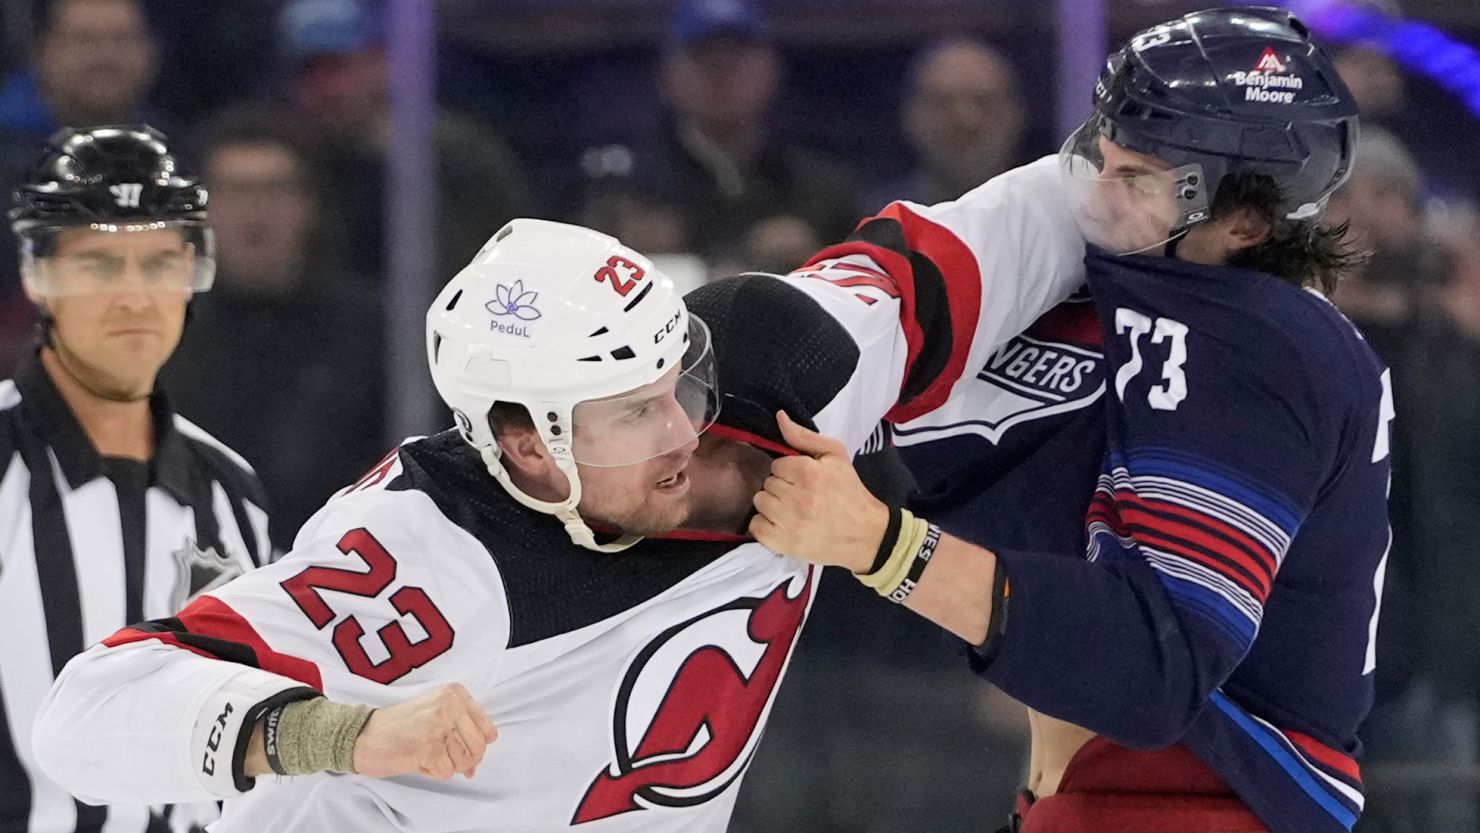 Kurtis MacDermid (left) and Matt Rempe fight during the NHL game between the New York Rangers and the New Jersey Devils.